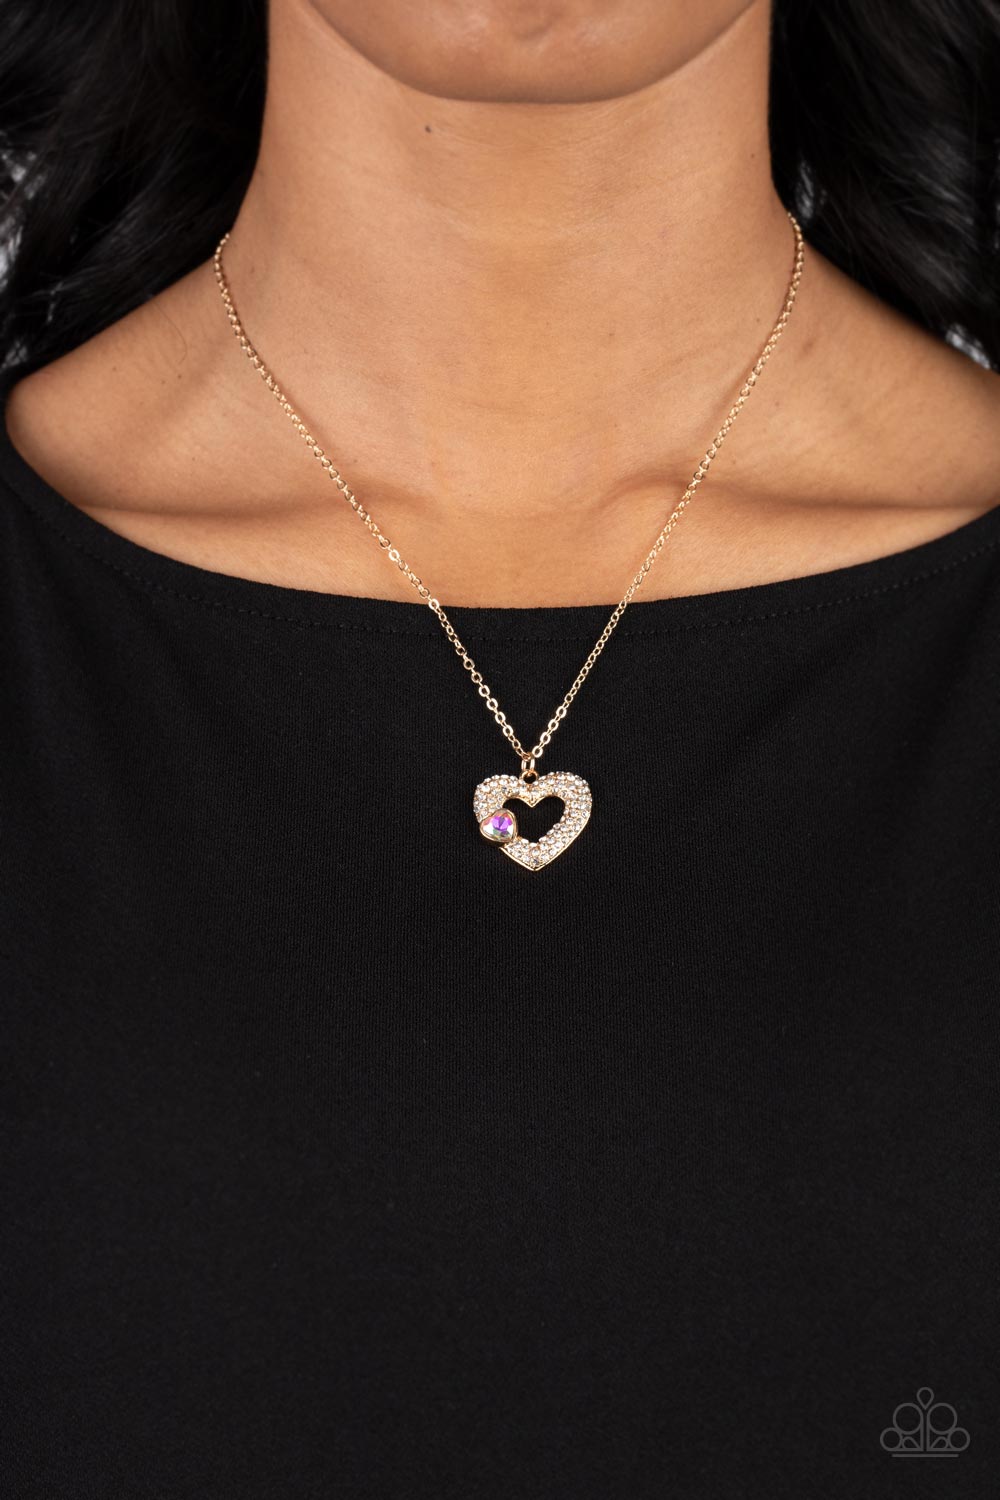 Bedazzled Bliss Multi &amp; Gold Heart Necklace - Paparazzi Accessories-on model - CarasShop.com - $5 Jewelry by Cara Jewels